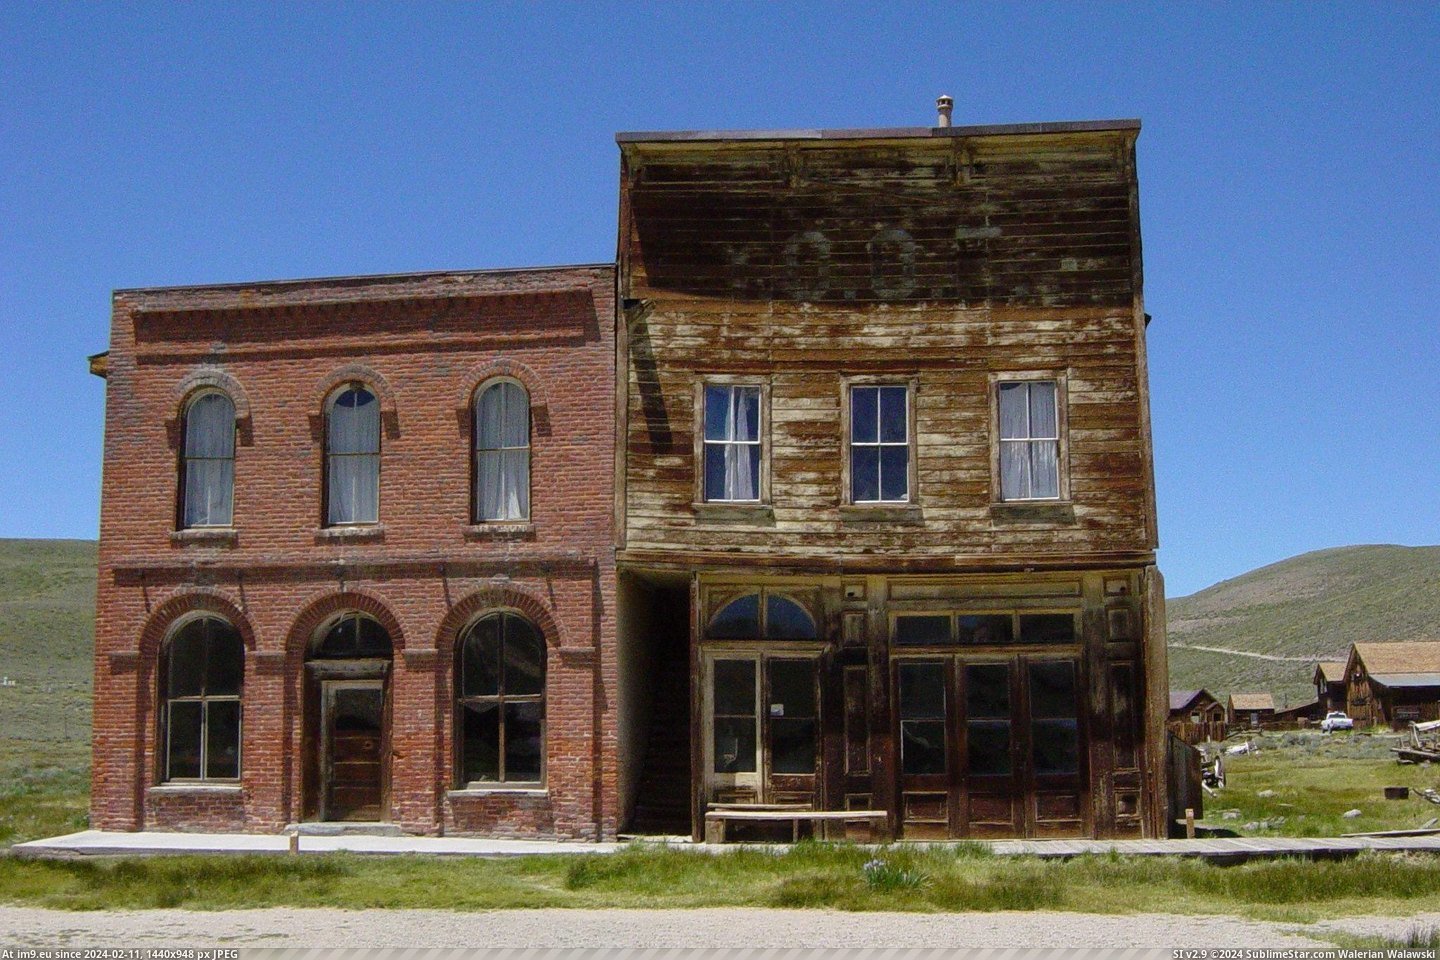 #California #Office #Ioof #Hall #Bodie Ioof Hall And Post Office In Bodie, California Pic. (Image of album Bodie - a ghost town in Eastern California))